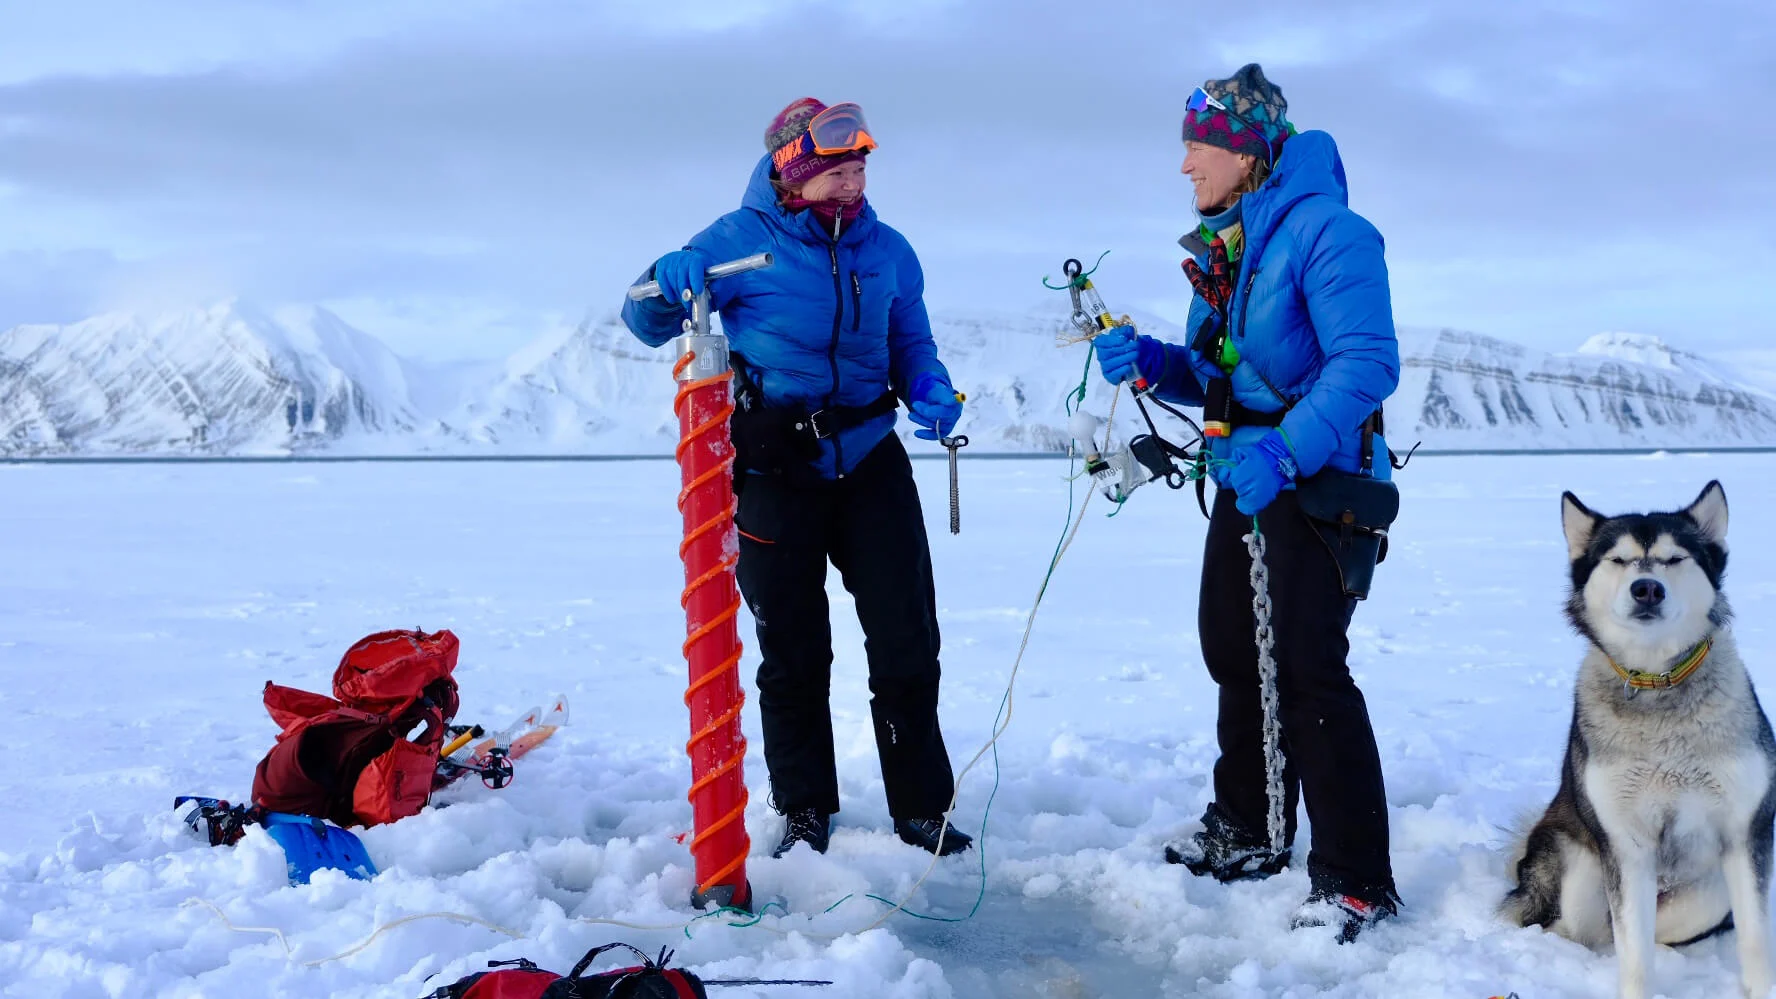 Sorby and Fålun Strøm collect samples while Ettra supervises their work. (Hearts in the Ice)